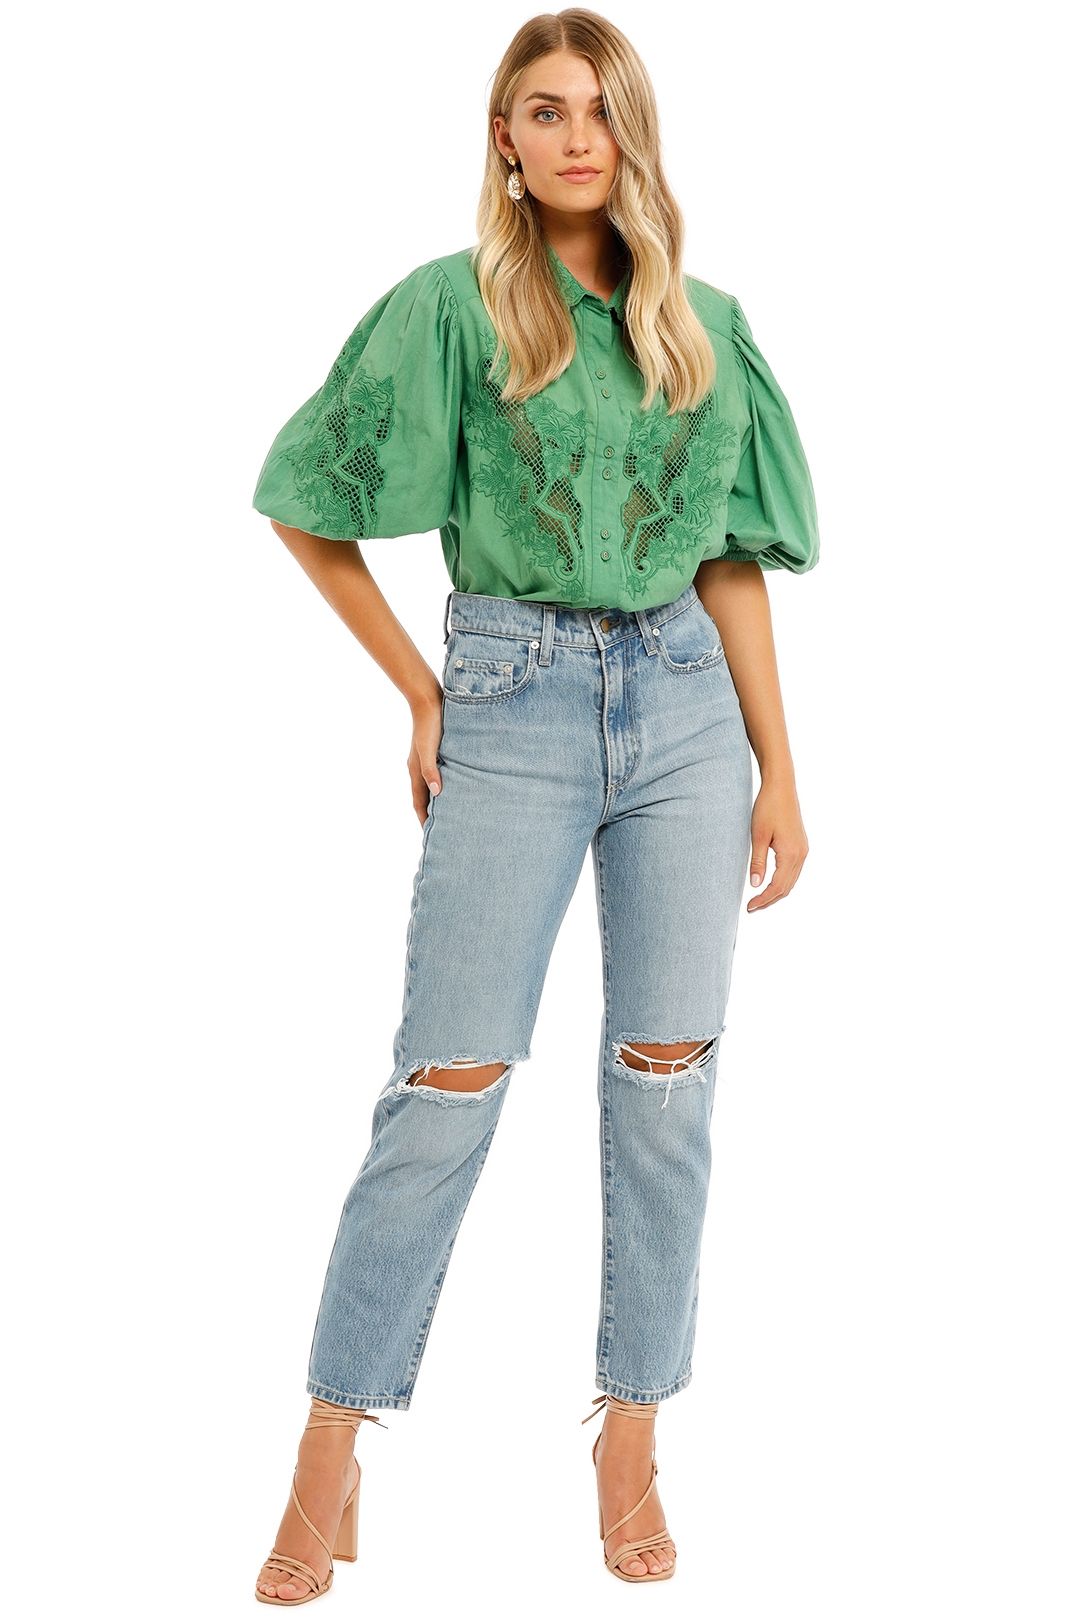 Ministry of Style Flora Embroidery Blouse Jade balloon